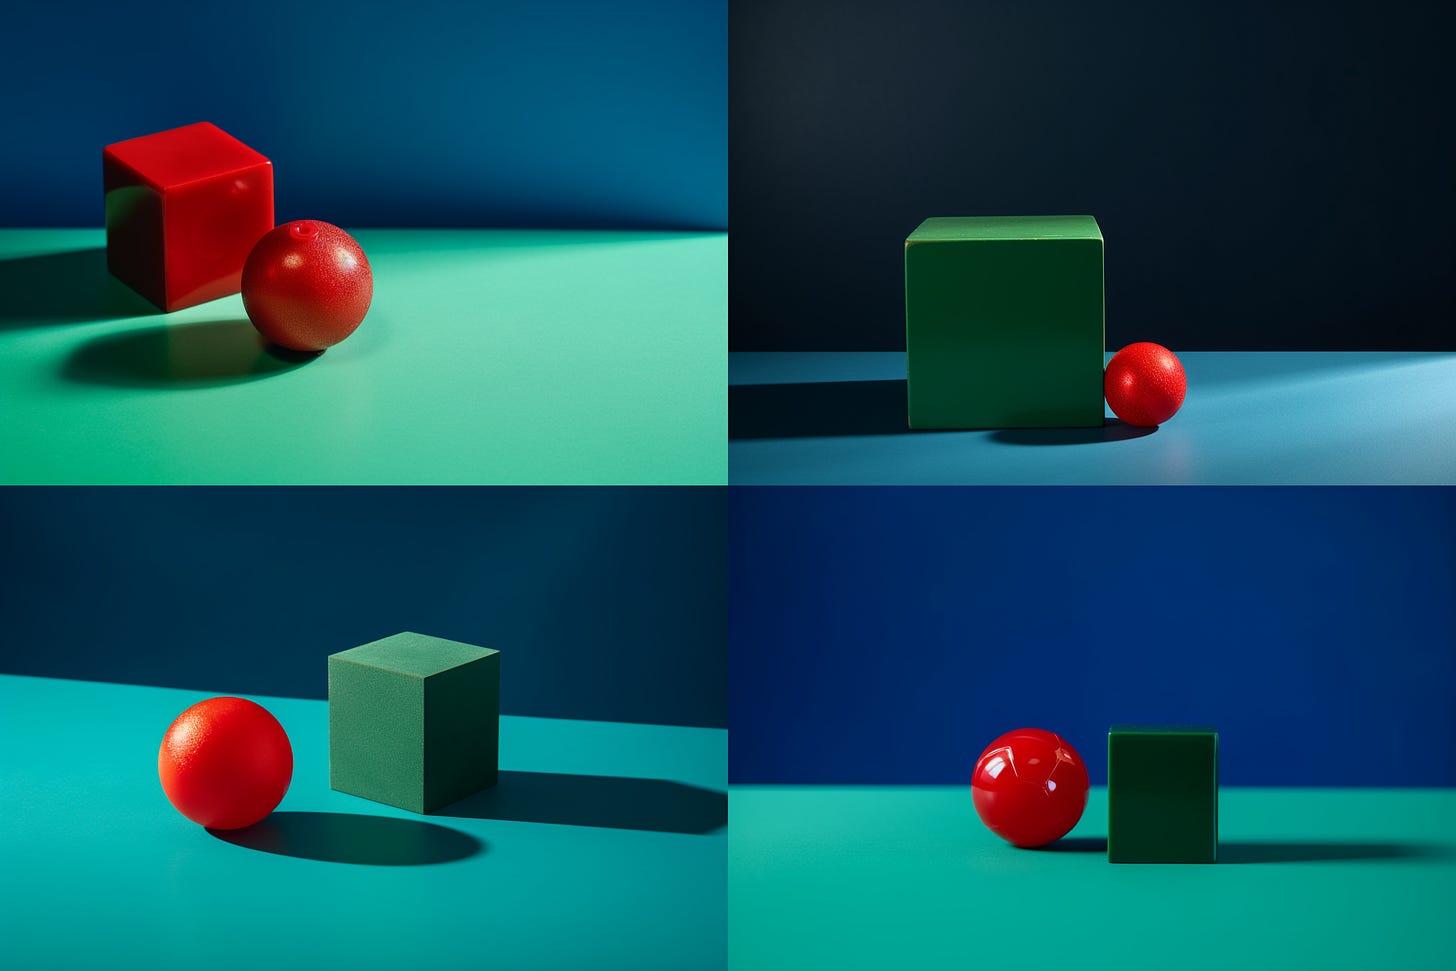 Midjourney V5 results for "one red ball and two green cubes on a blue table" -  4-image grid.